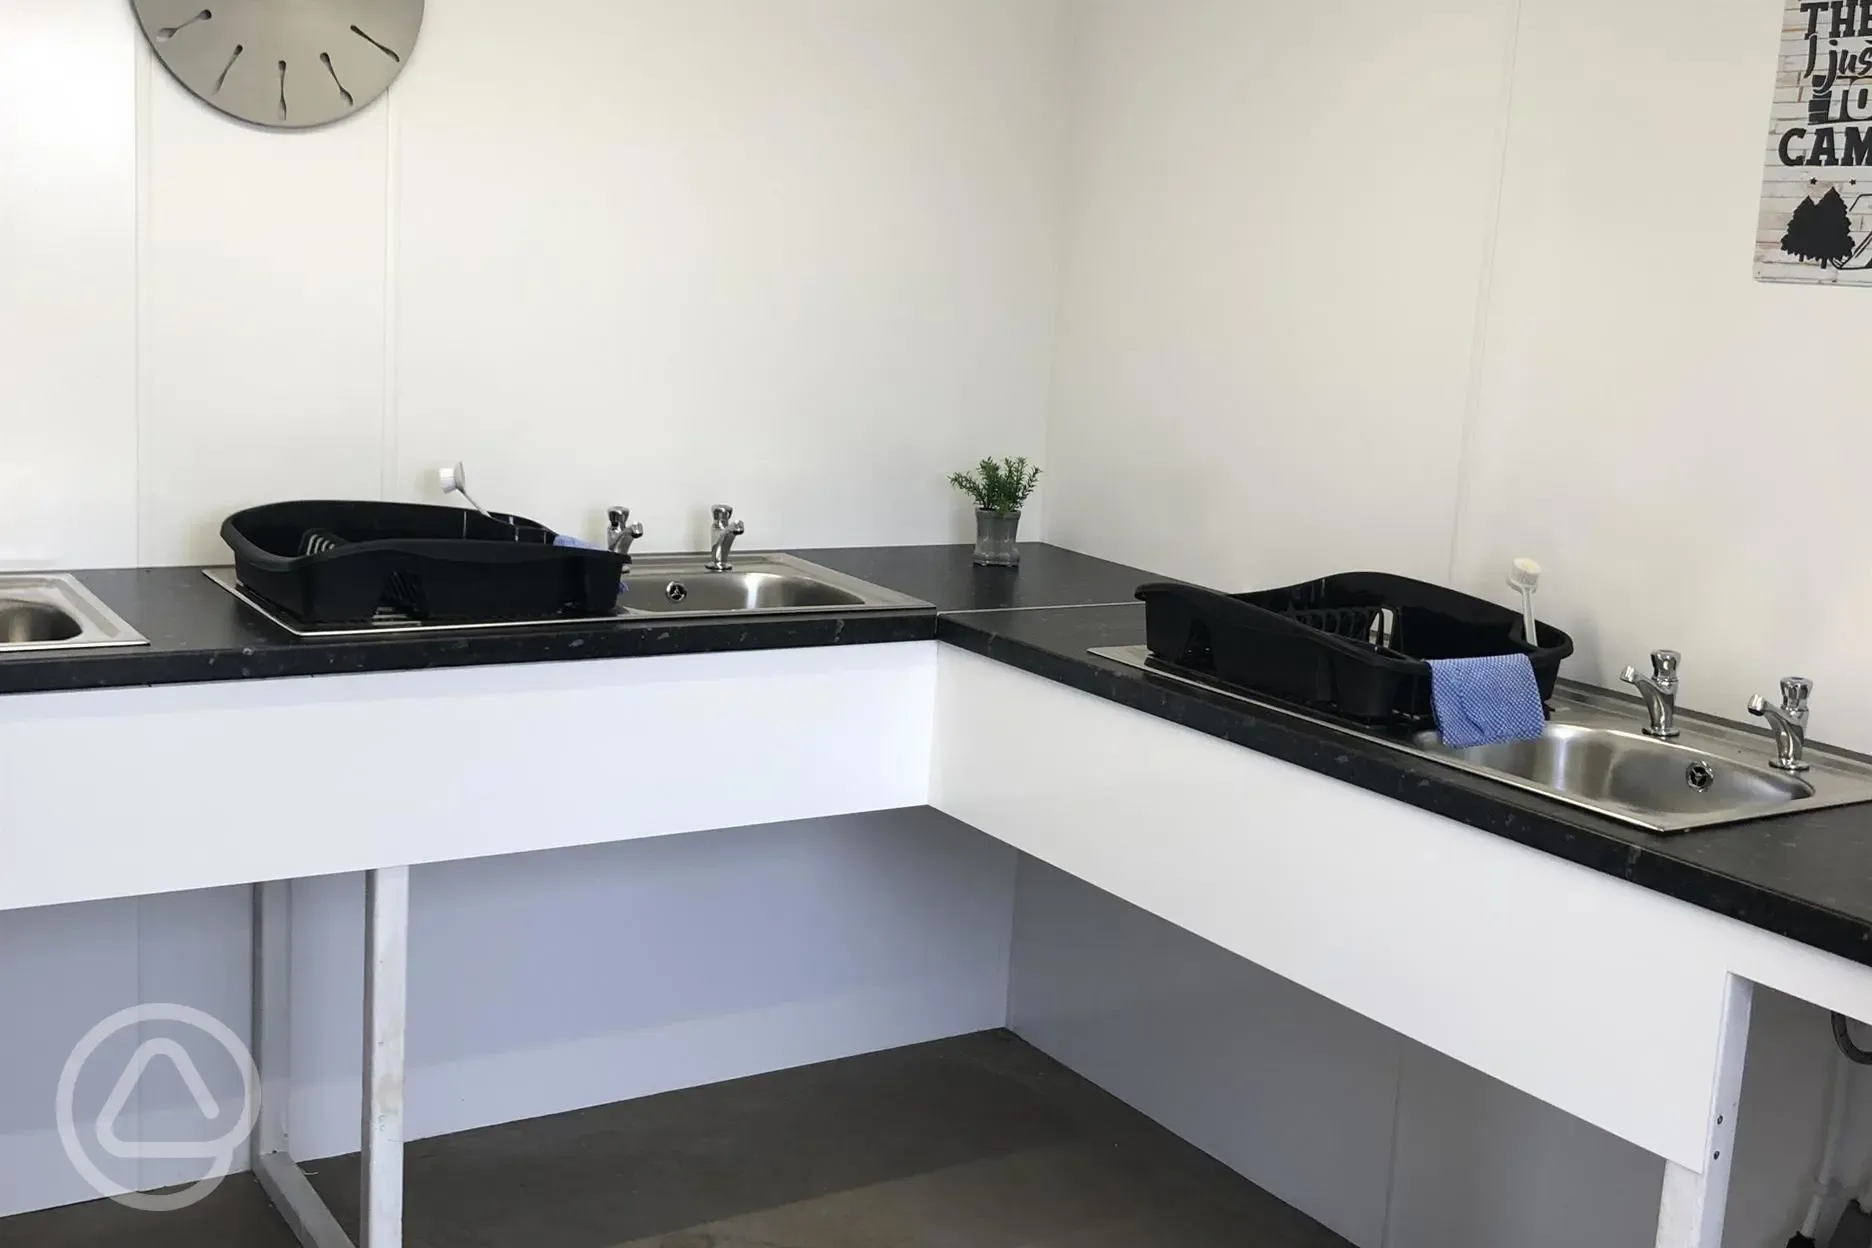 New facilities including laundry, kitchen facilities and dishwashing area